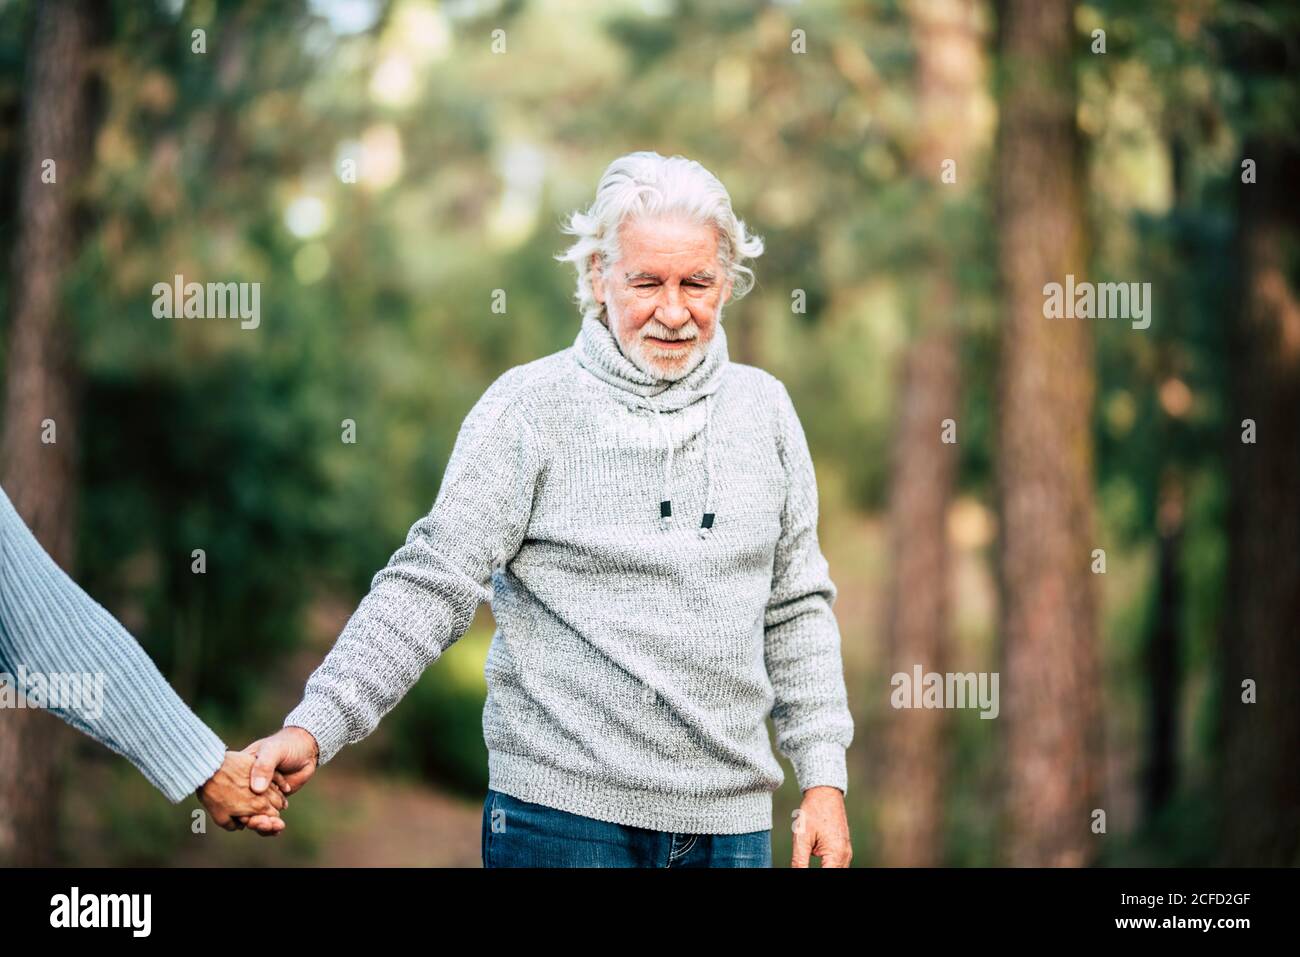 Assistance and disease alzheimer problems for old people- senior man holding hands and walk in the forest to enjoy the outdoor nature leisure activity Stock Photo